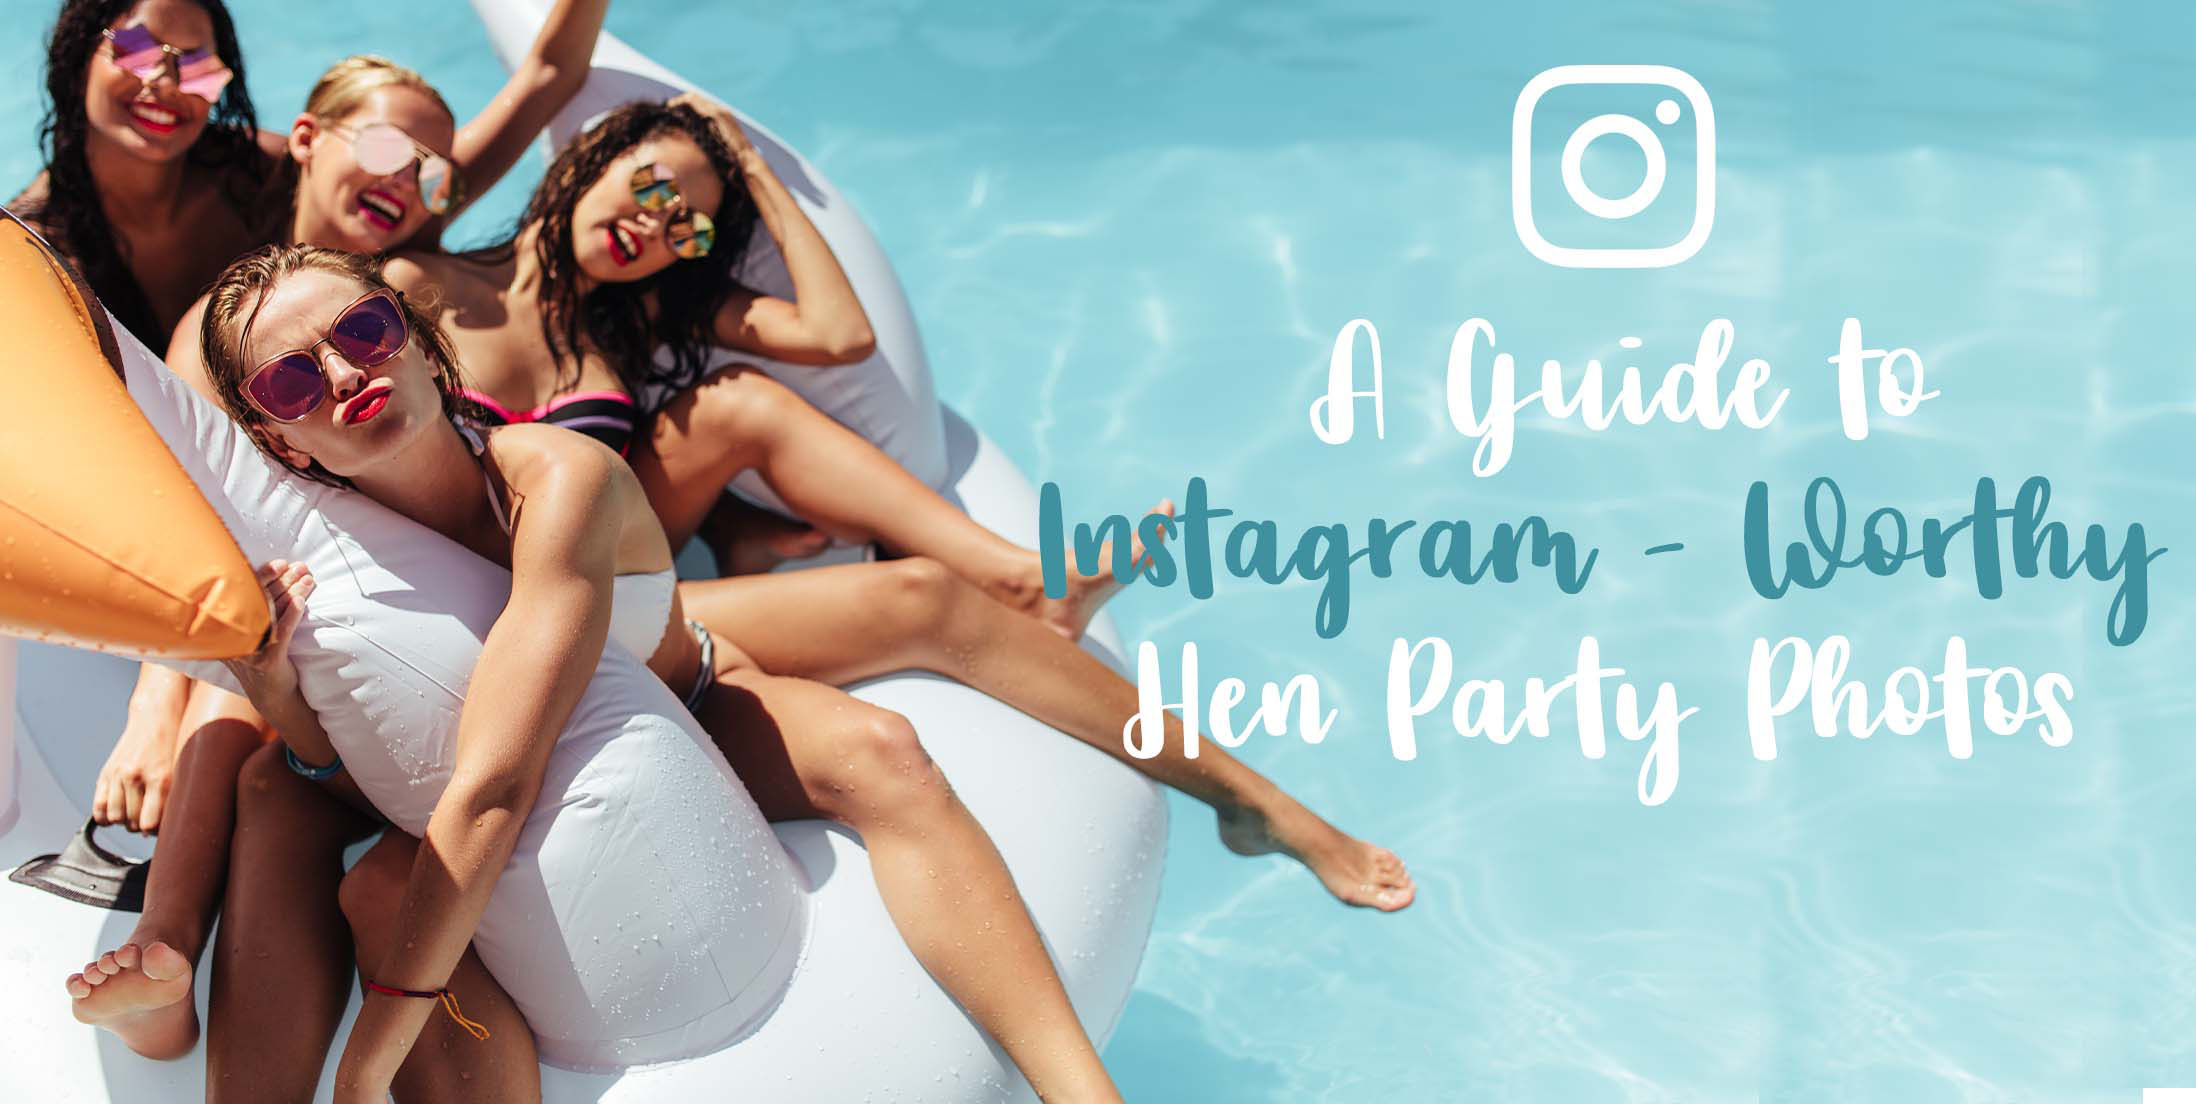 Guide to Instagram-worthy Hen Party Photos